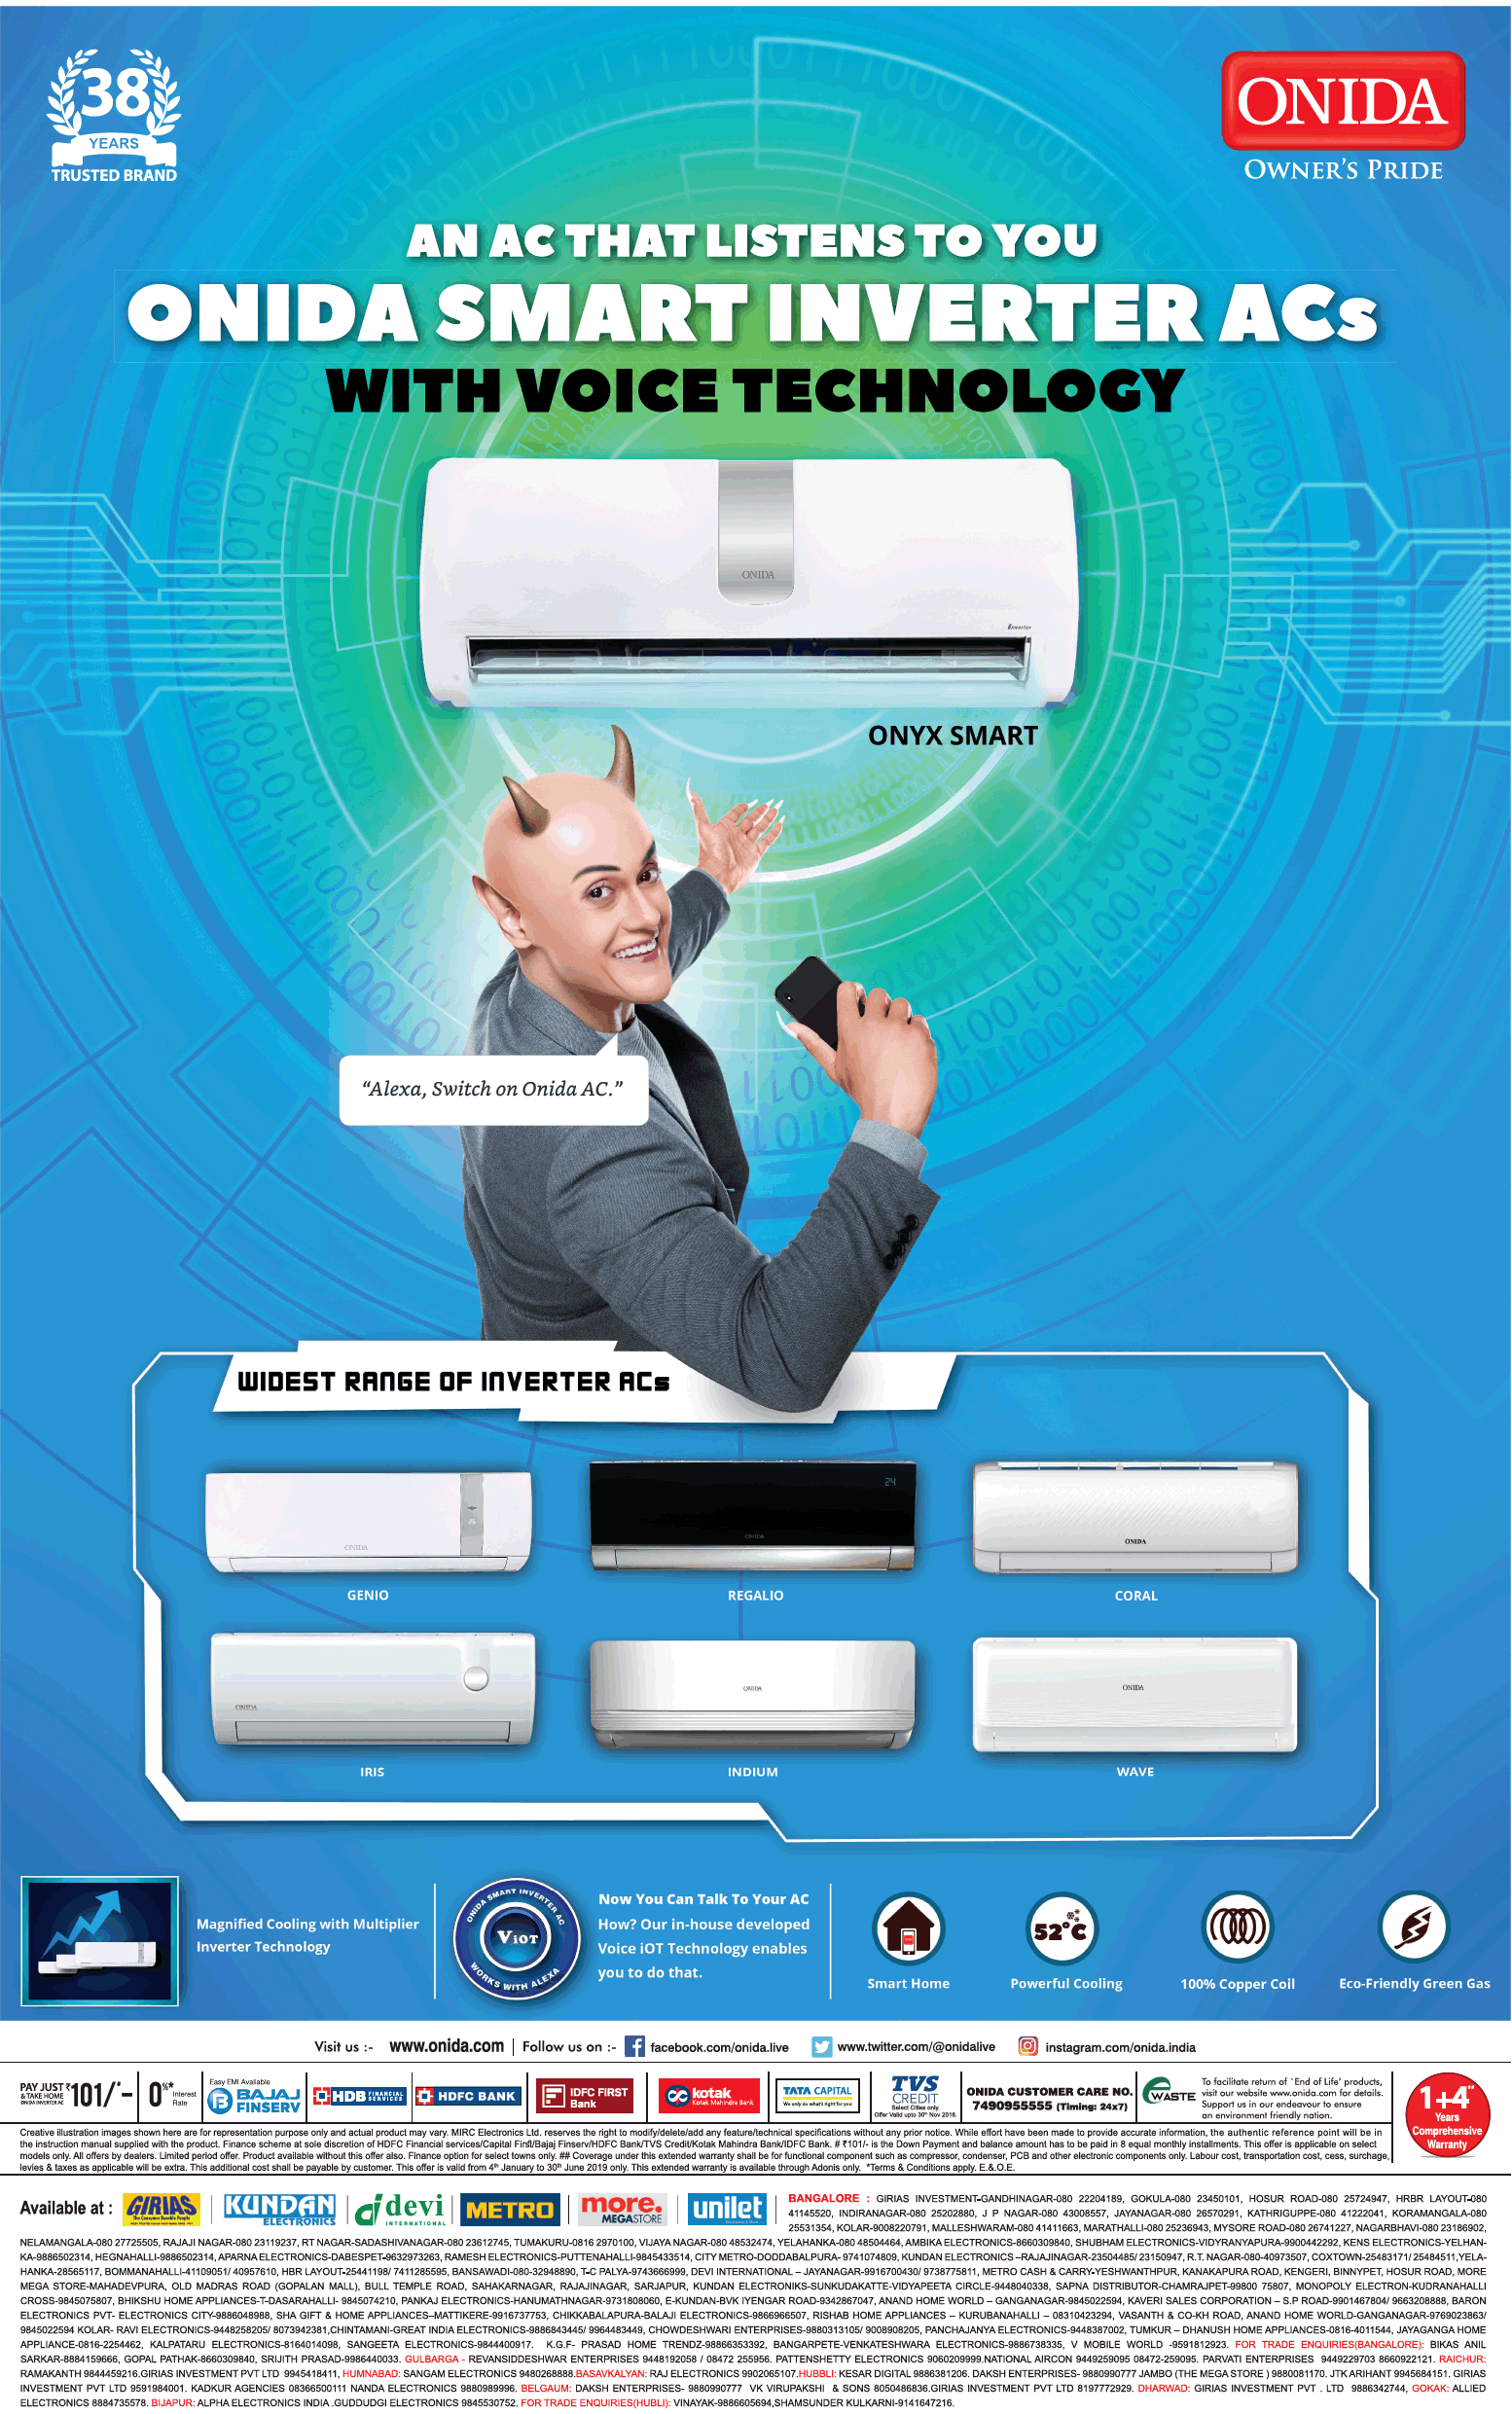 onida-air-conditioners-smart-inverter-acs-with-voice-technology-ad-bangalore-times-09-04-2019.png